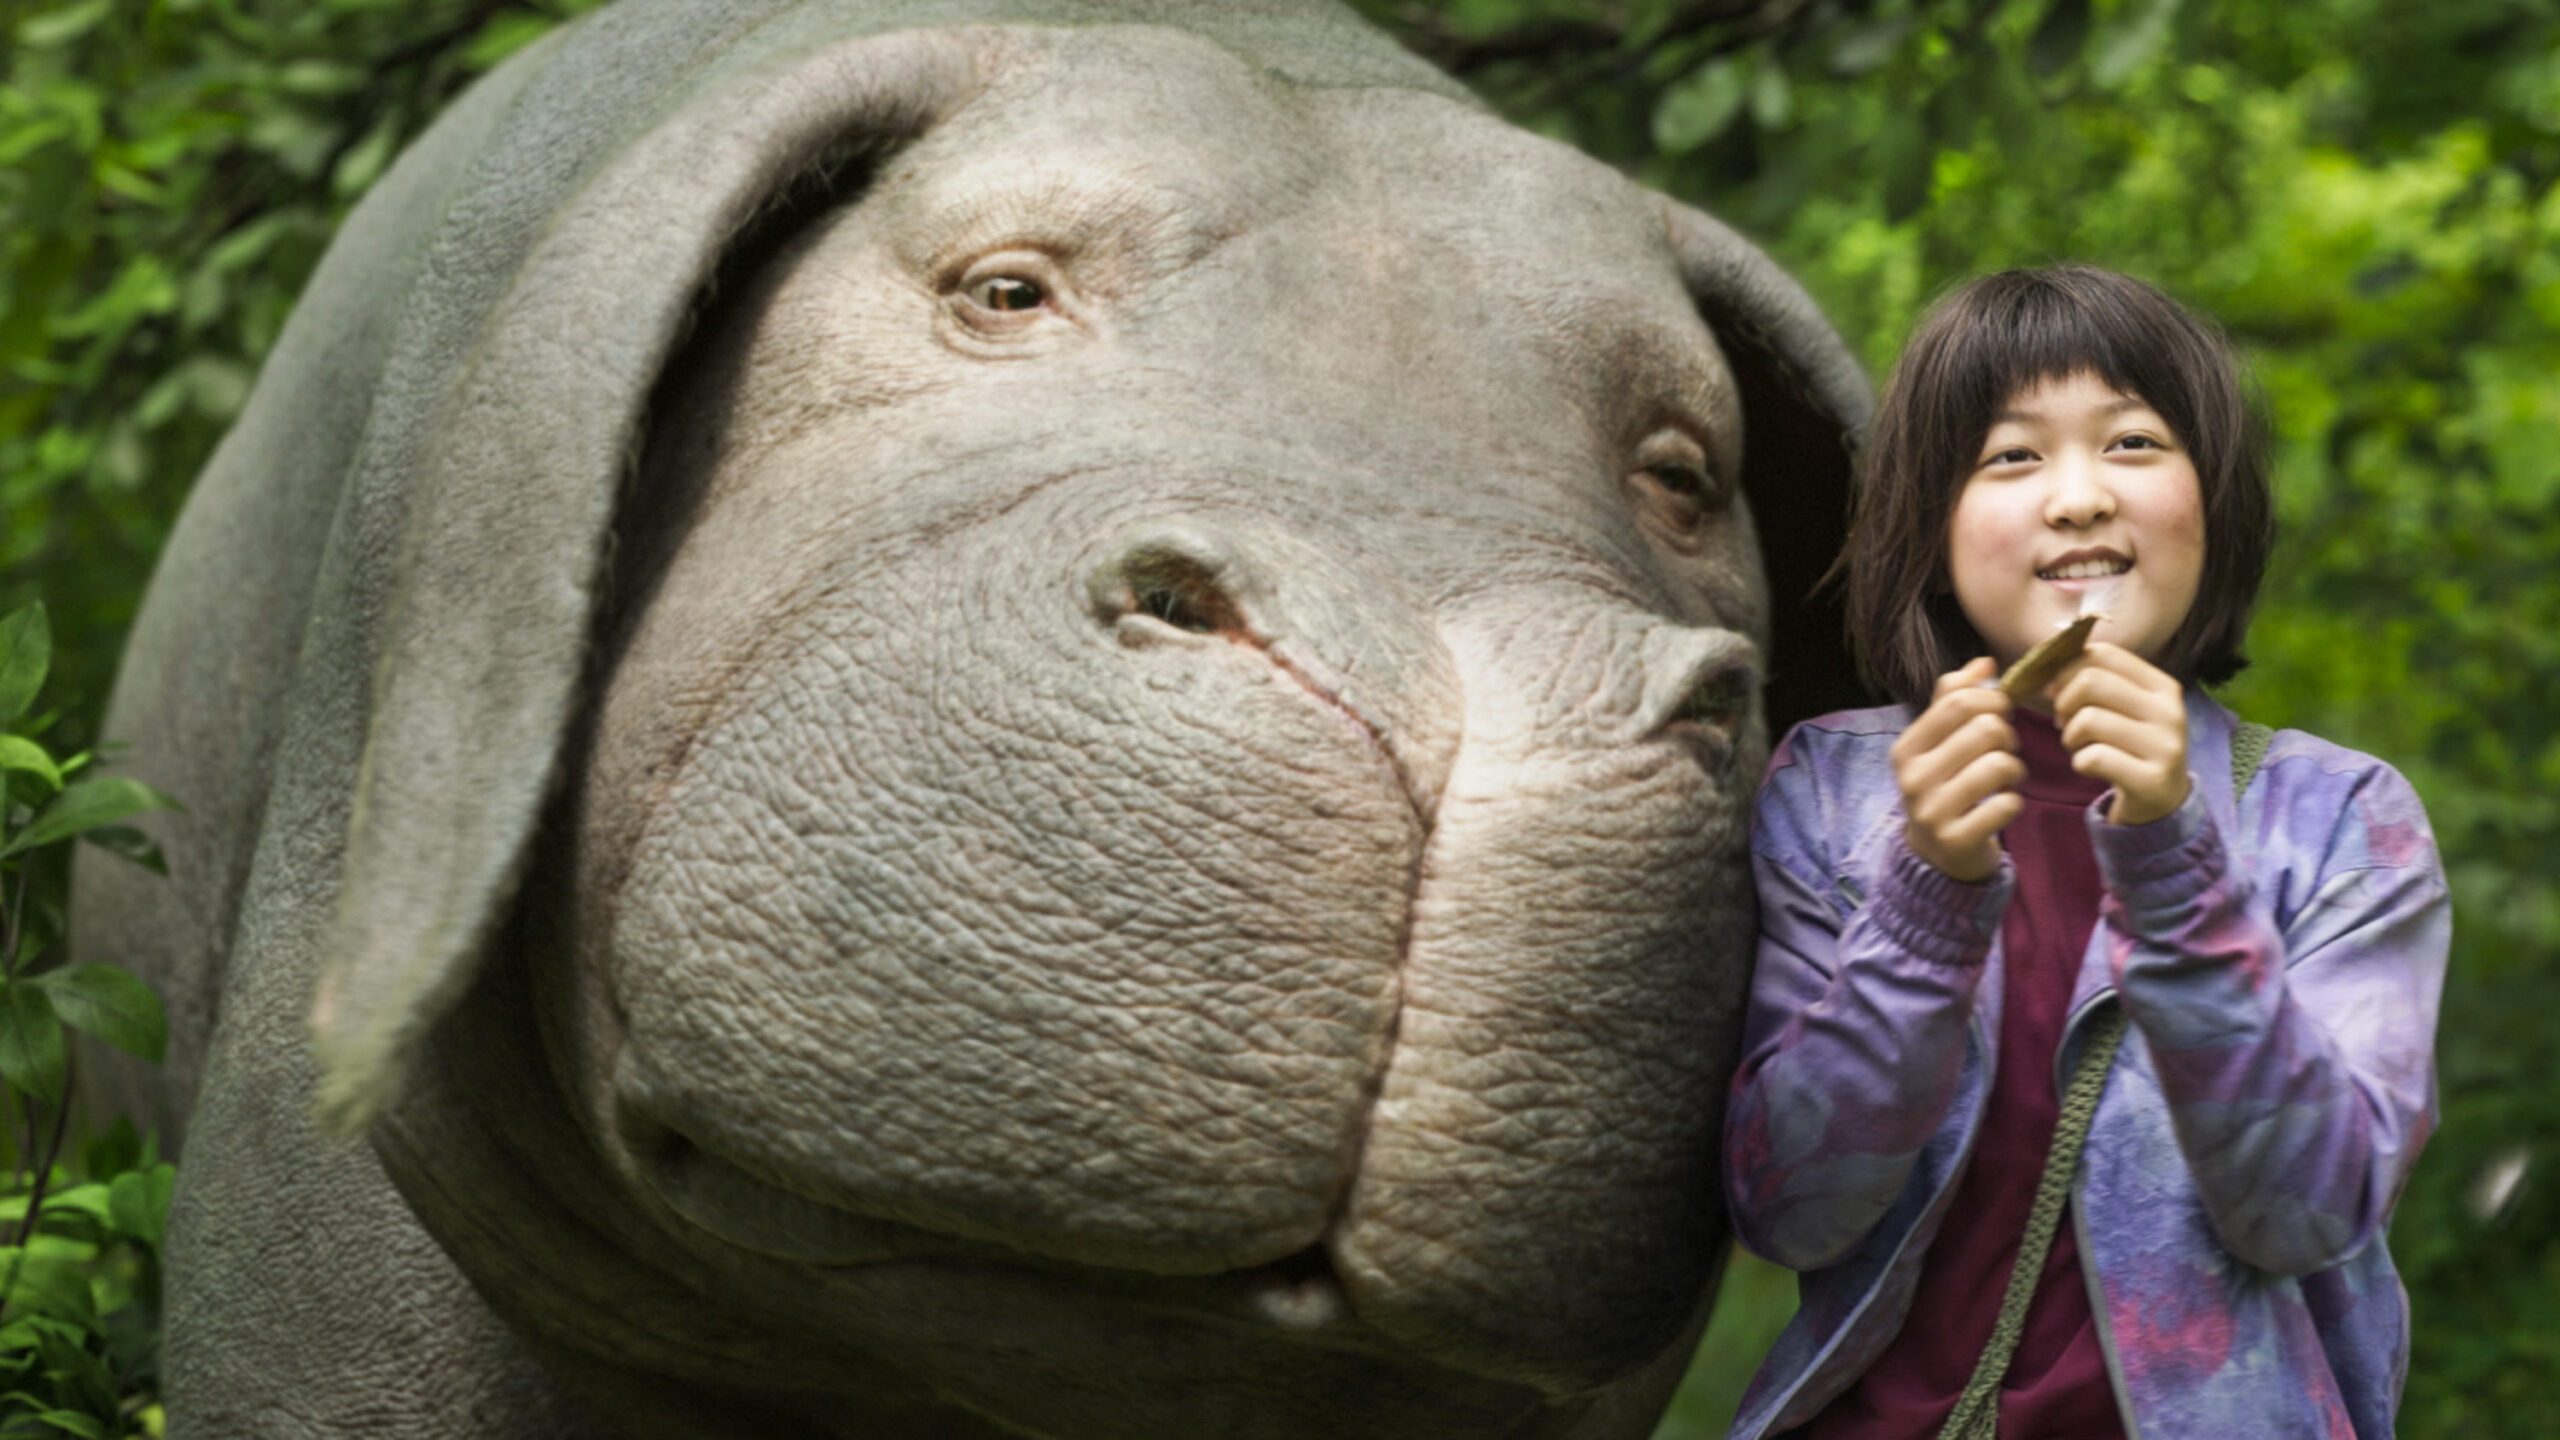 7 things to know about Bong Joon-ho’s game-changing ‘Okja’